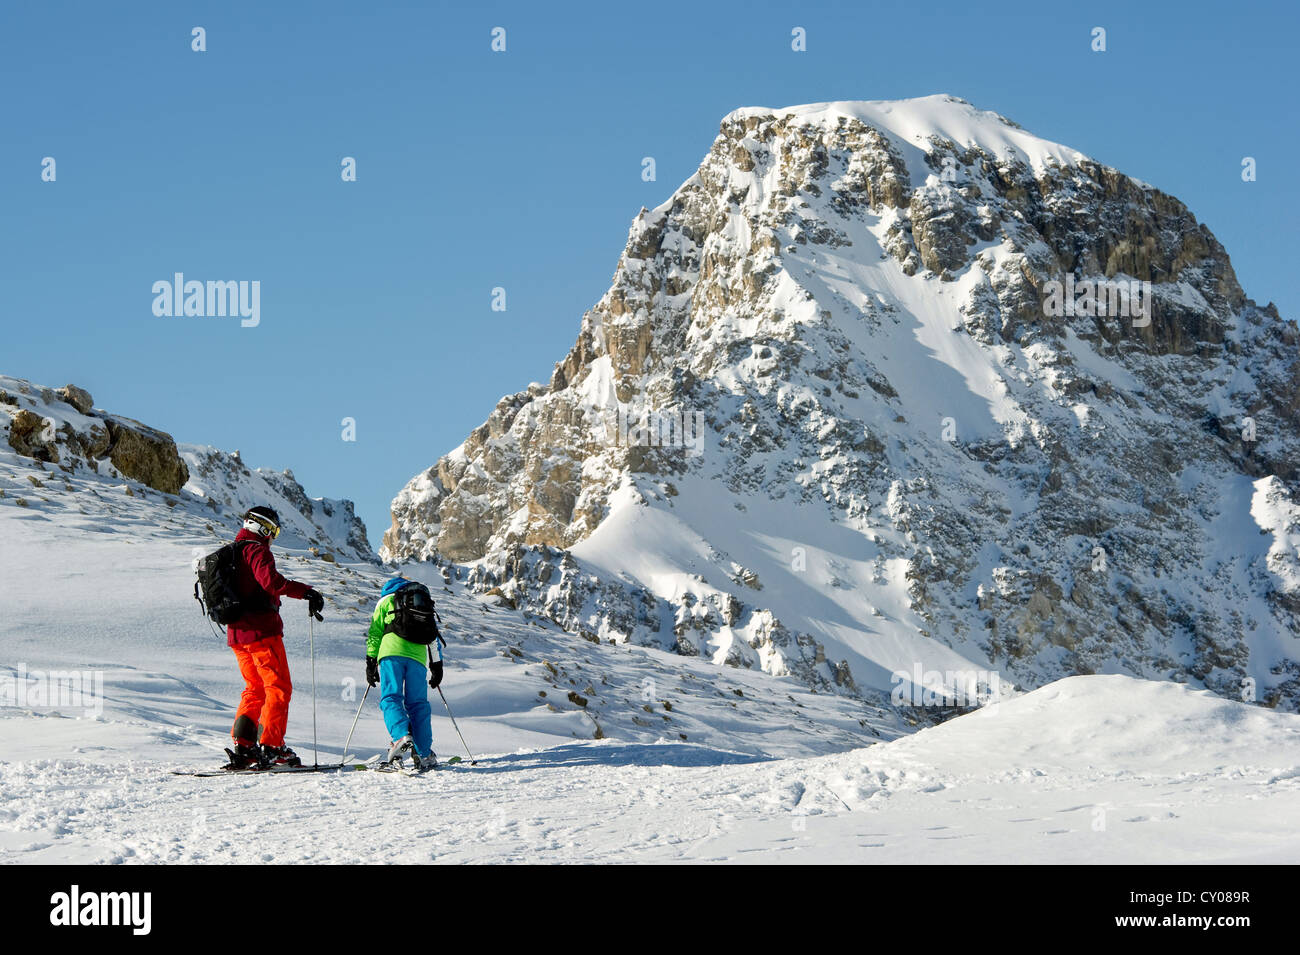 Cross-country skiers, Tignes, Val d'Isere, Savoie, Alps, France, Europe Stock Photo